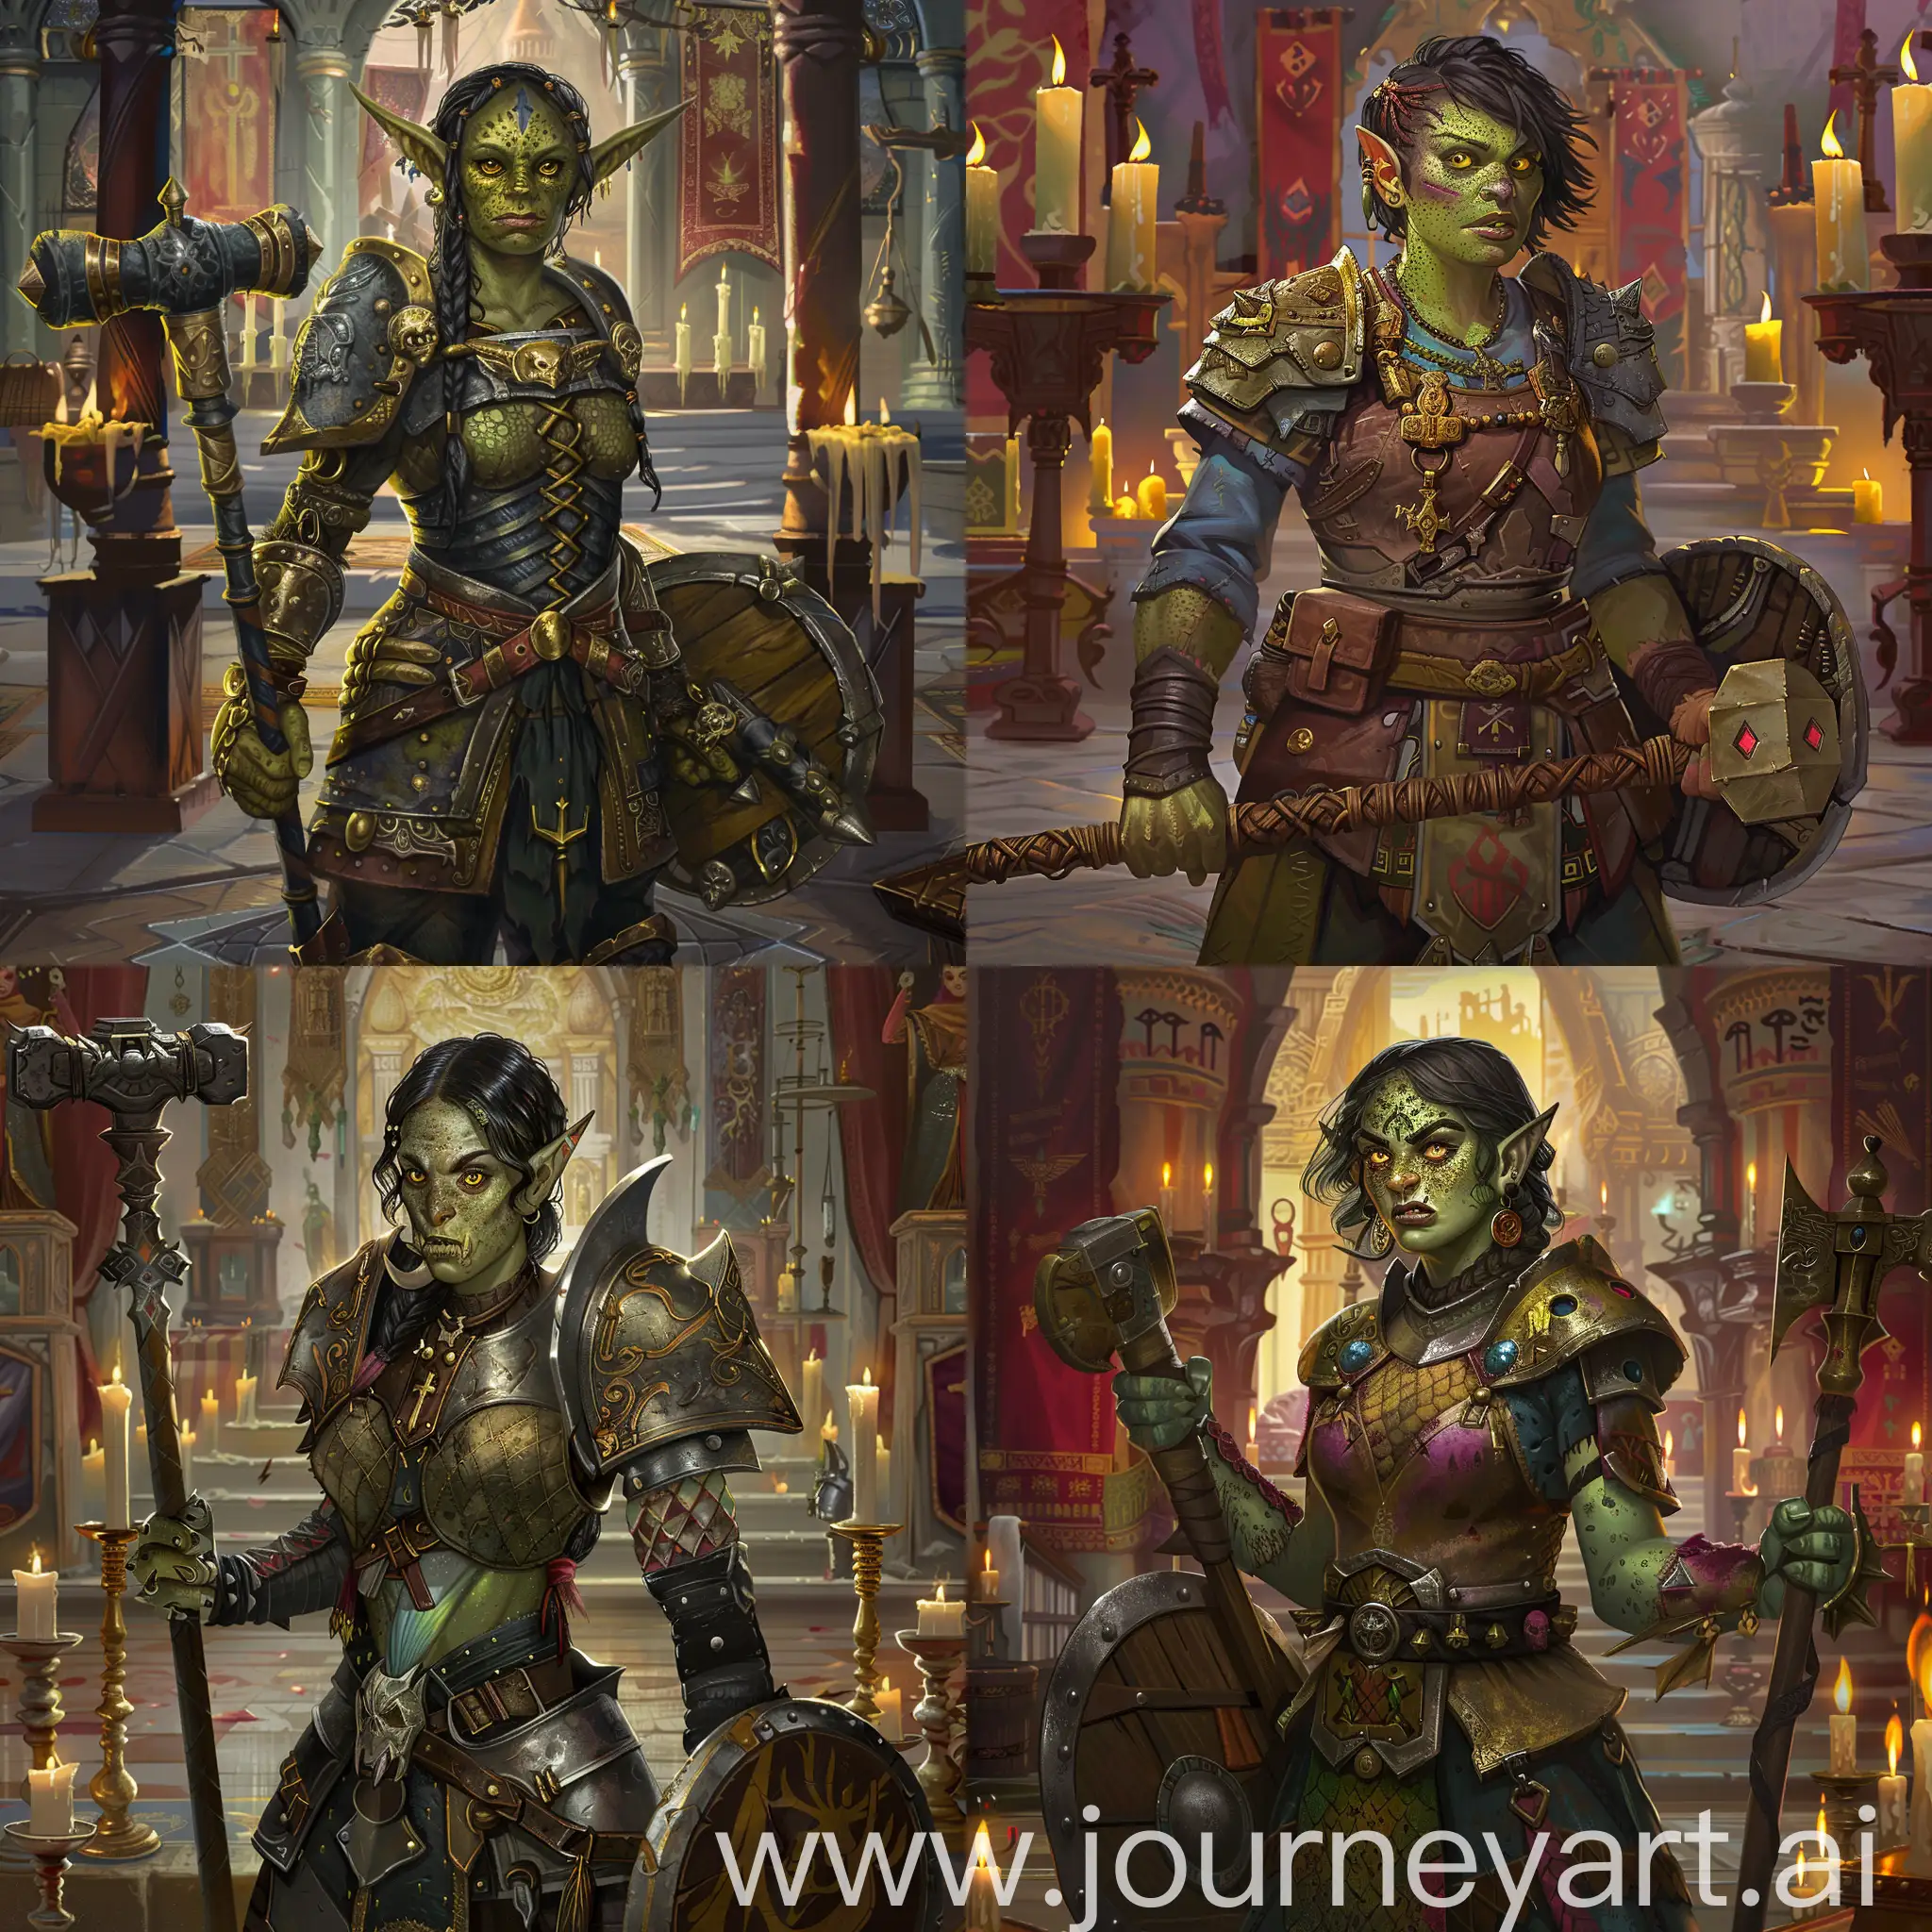 Draw a character from the Dungeons and Dragons universe according to the following description: she is female orc priest, dressed in medieval warrior clothes. She has a mace and a shield. She has green skin with freckles, yellow eyes, short black hair with little braid. Sharp fangs are visible from under the lower lip. Temple, candles and tapestries on background